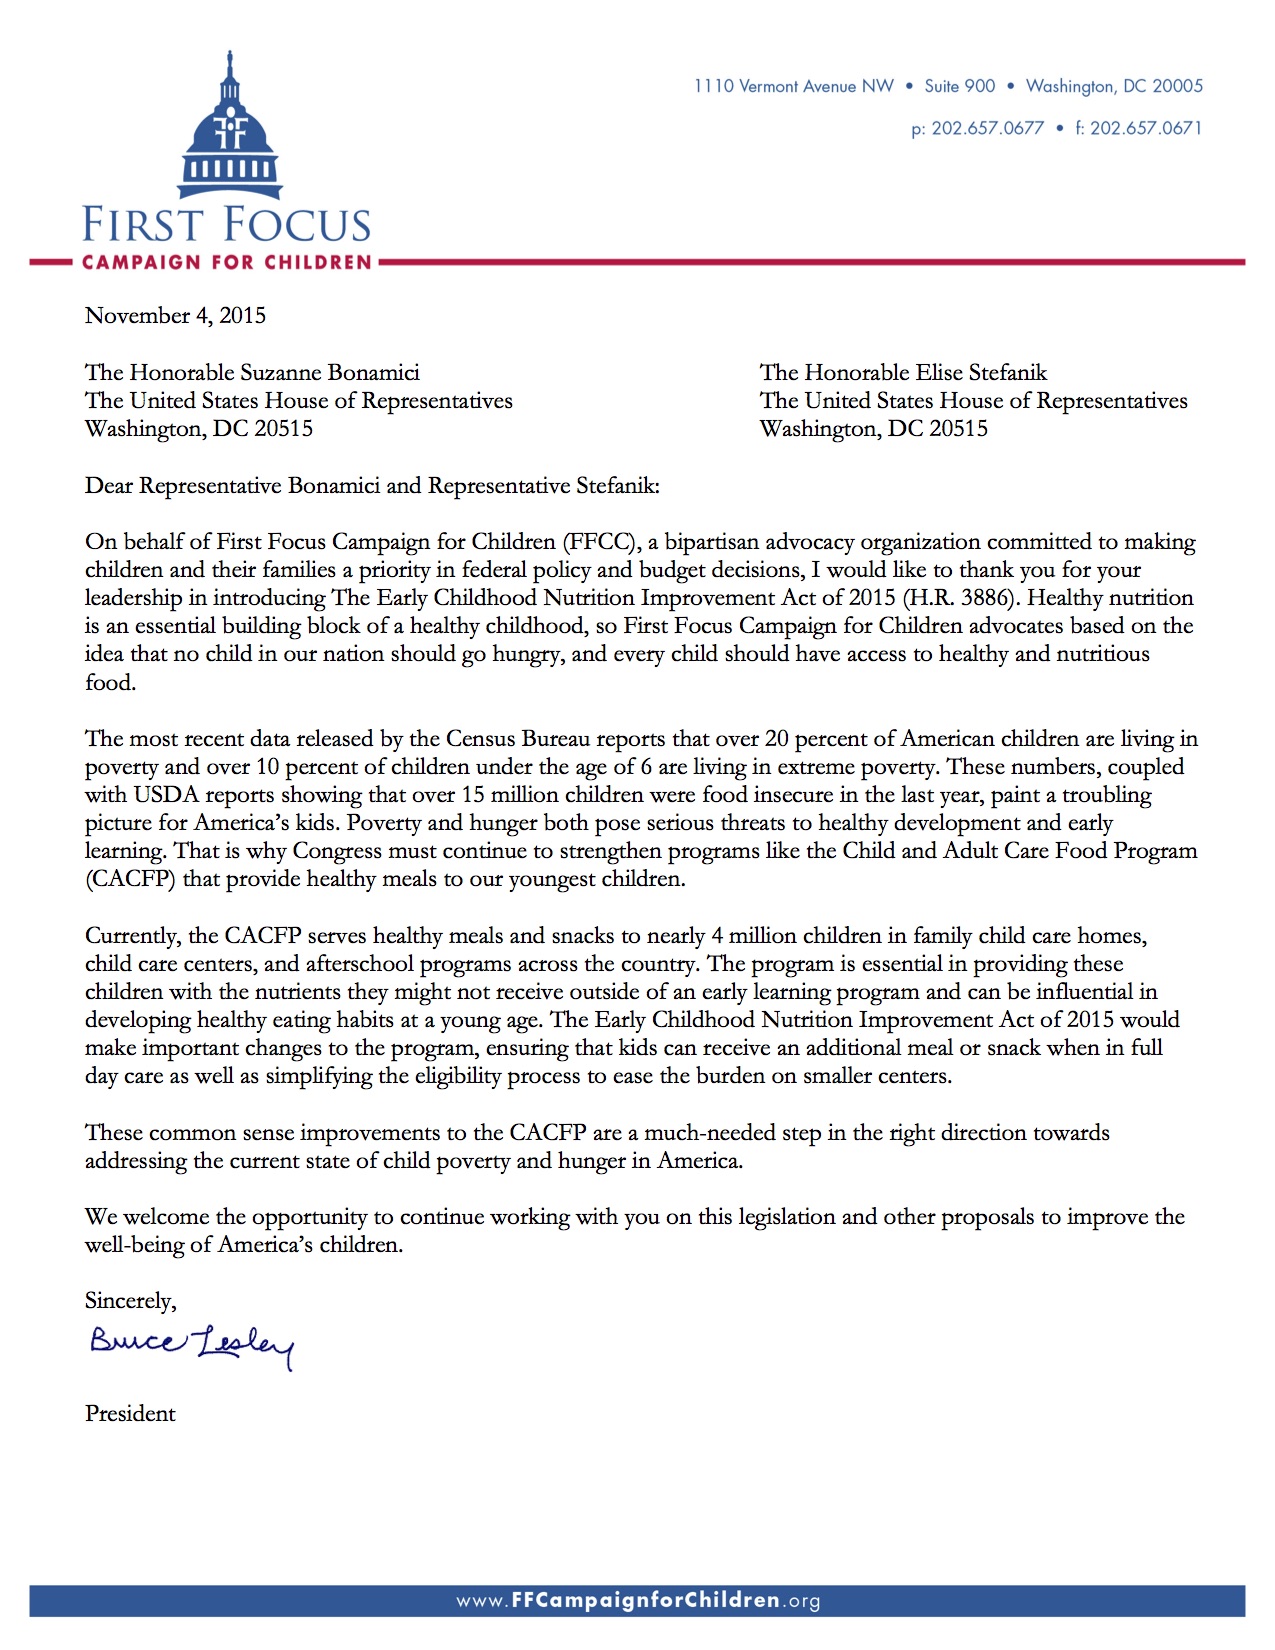 Early Childhood Nutrition Improvement Act Letter[1]